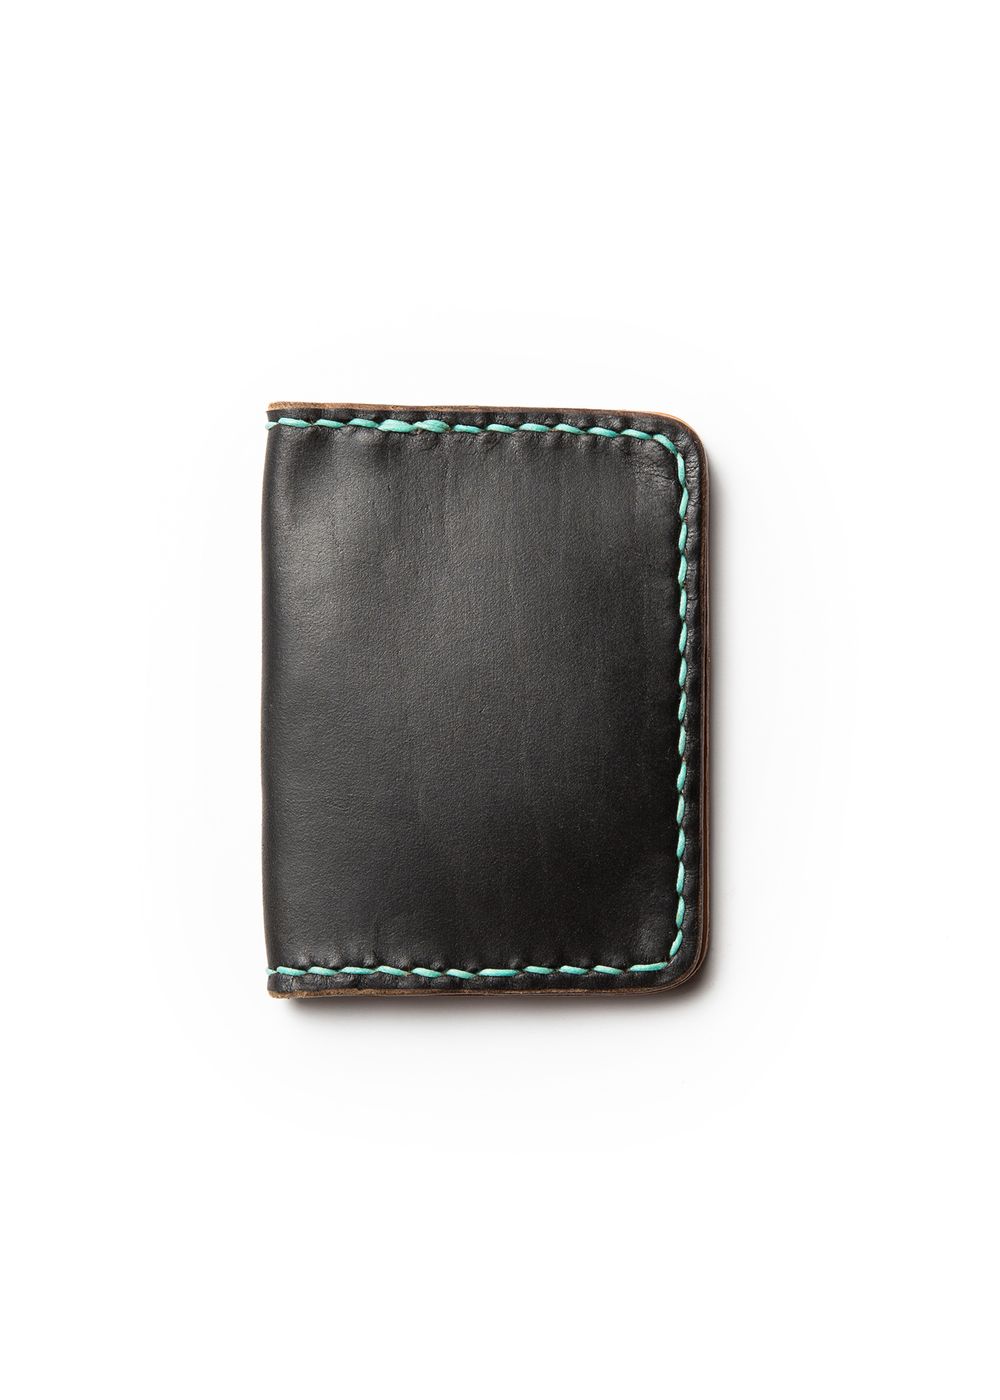 Black Leather Headlands Cash Fold Wallet with White Stiching